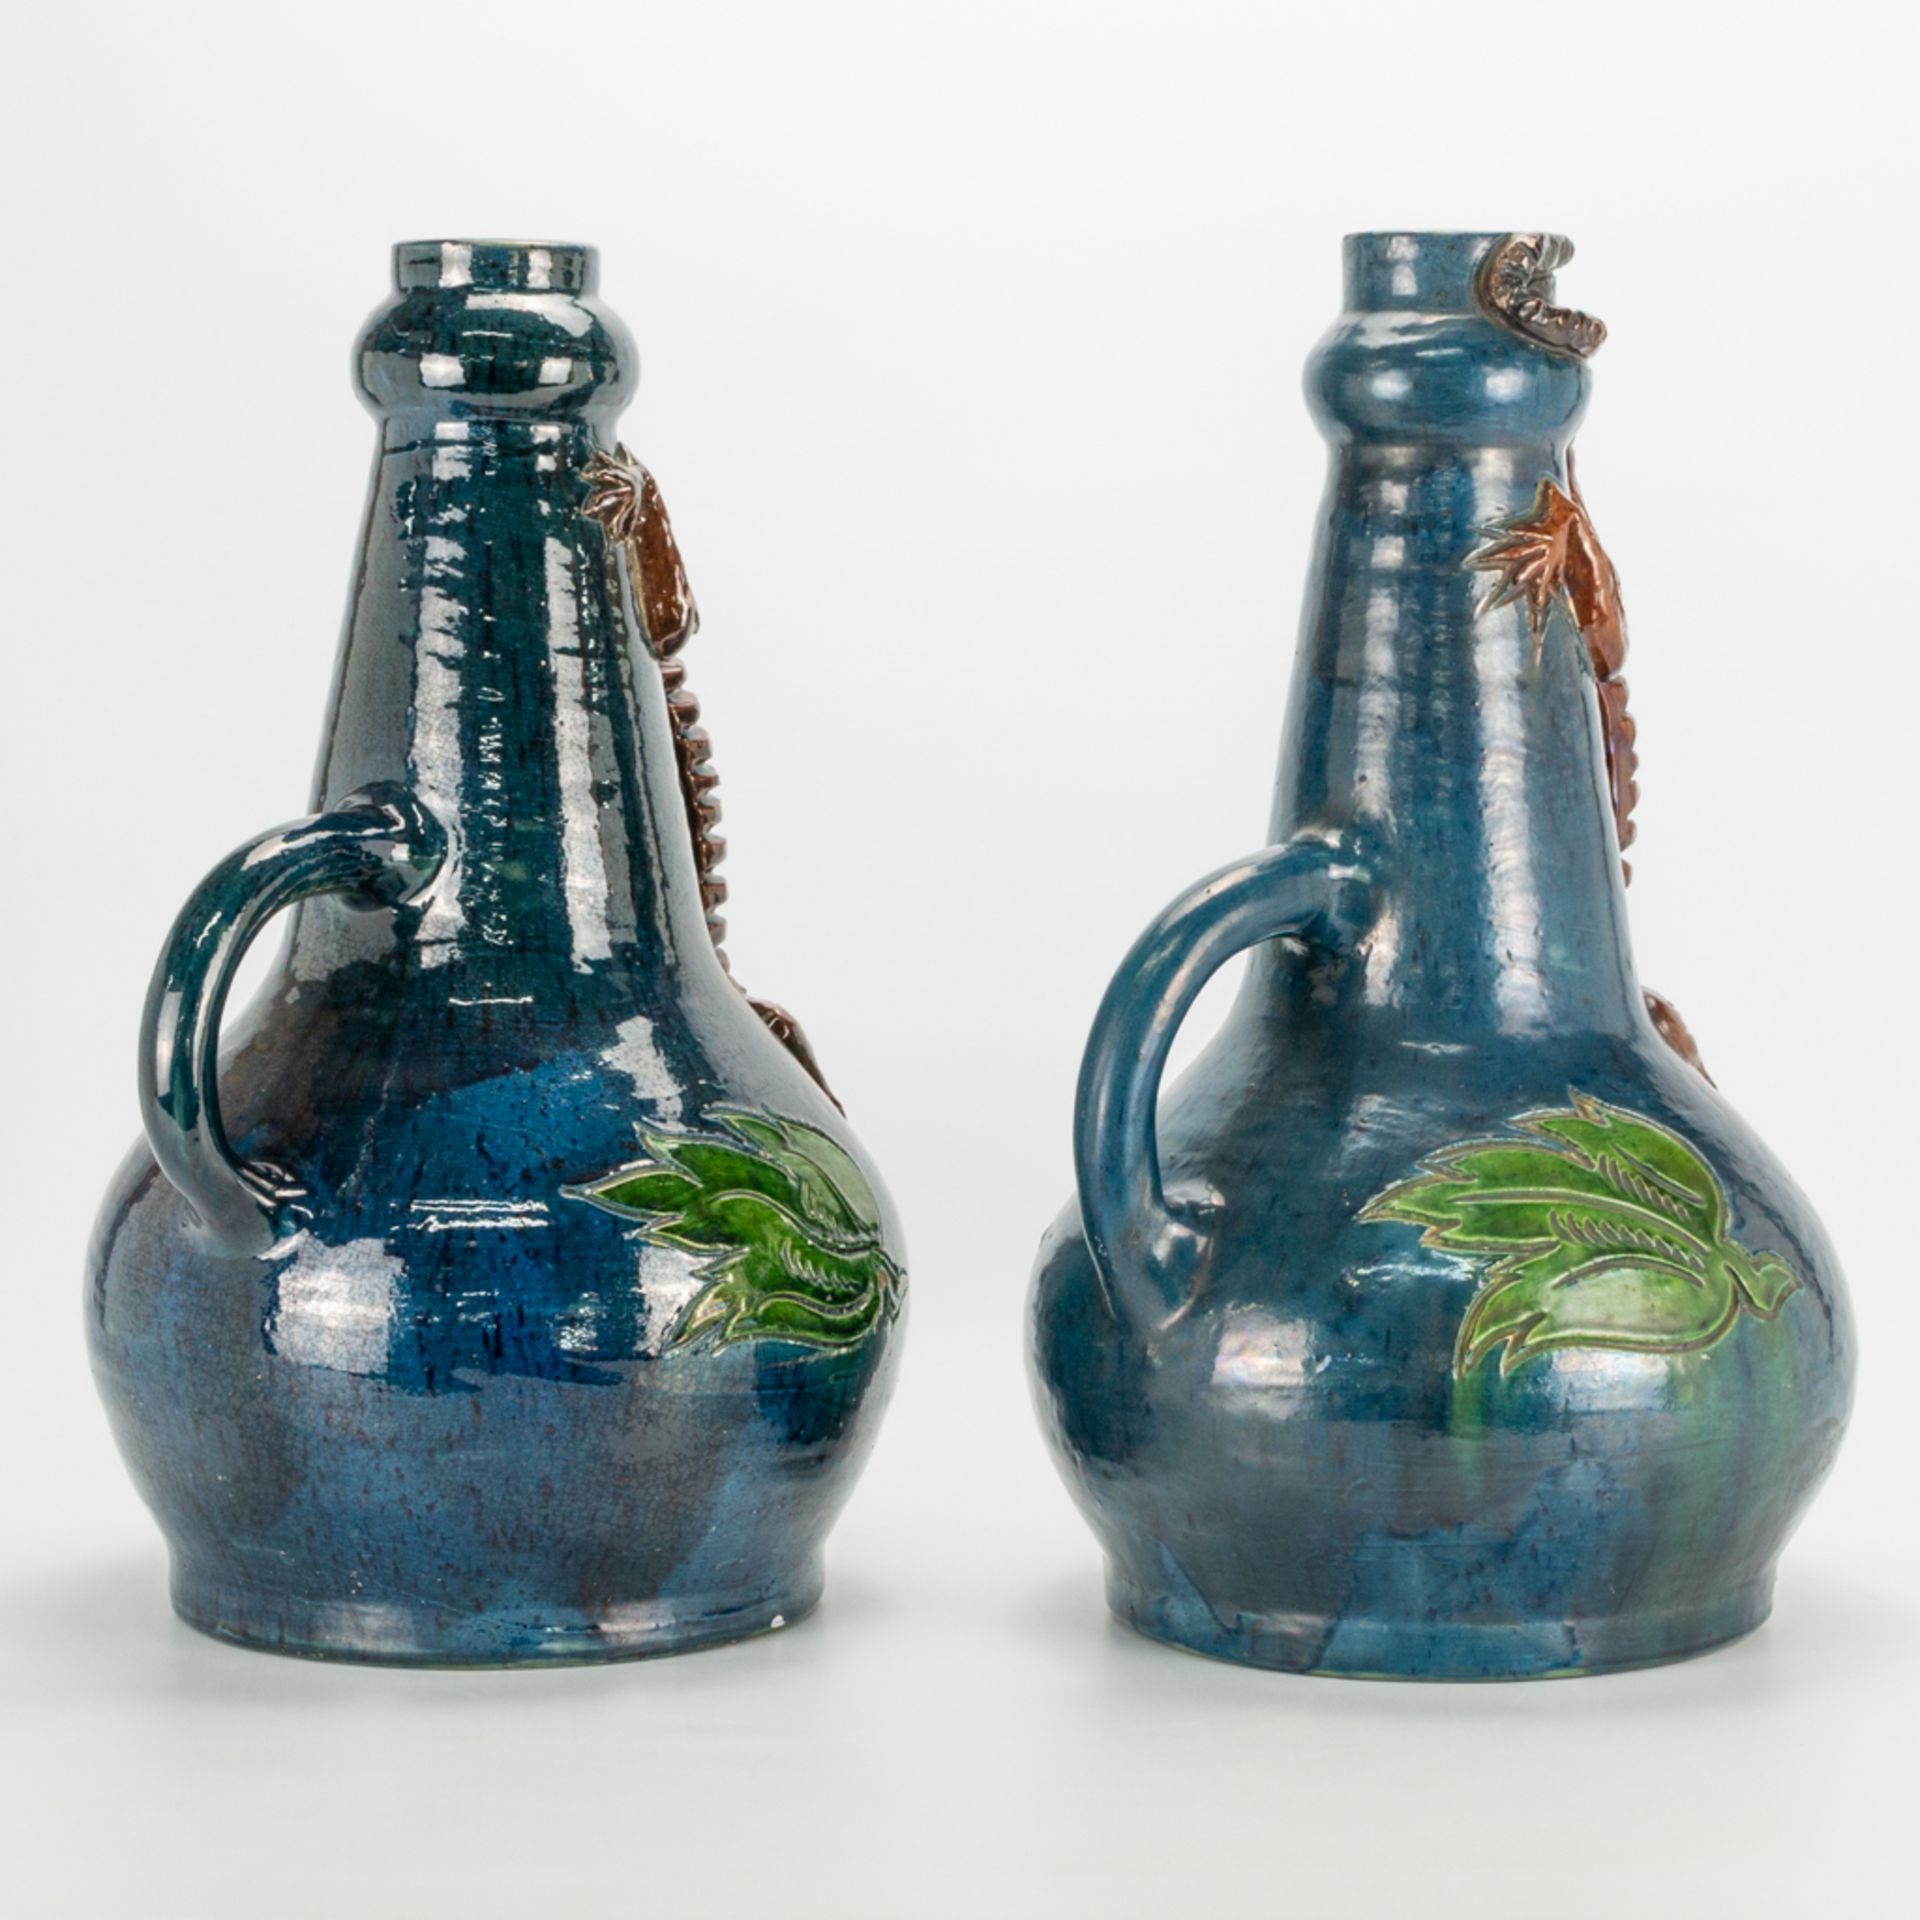 A pair of vases made in Flemish Earthenware with the decor of a salamander. (27 x 30 x 45 cm) - Image 3 of 20